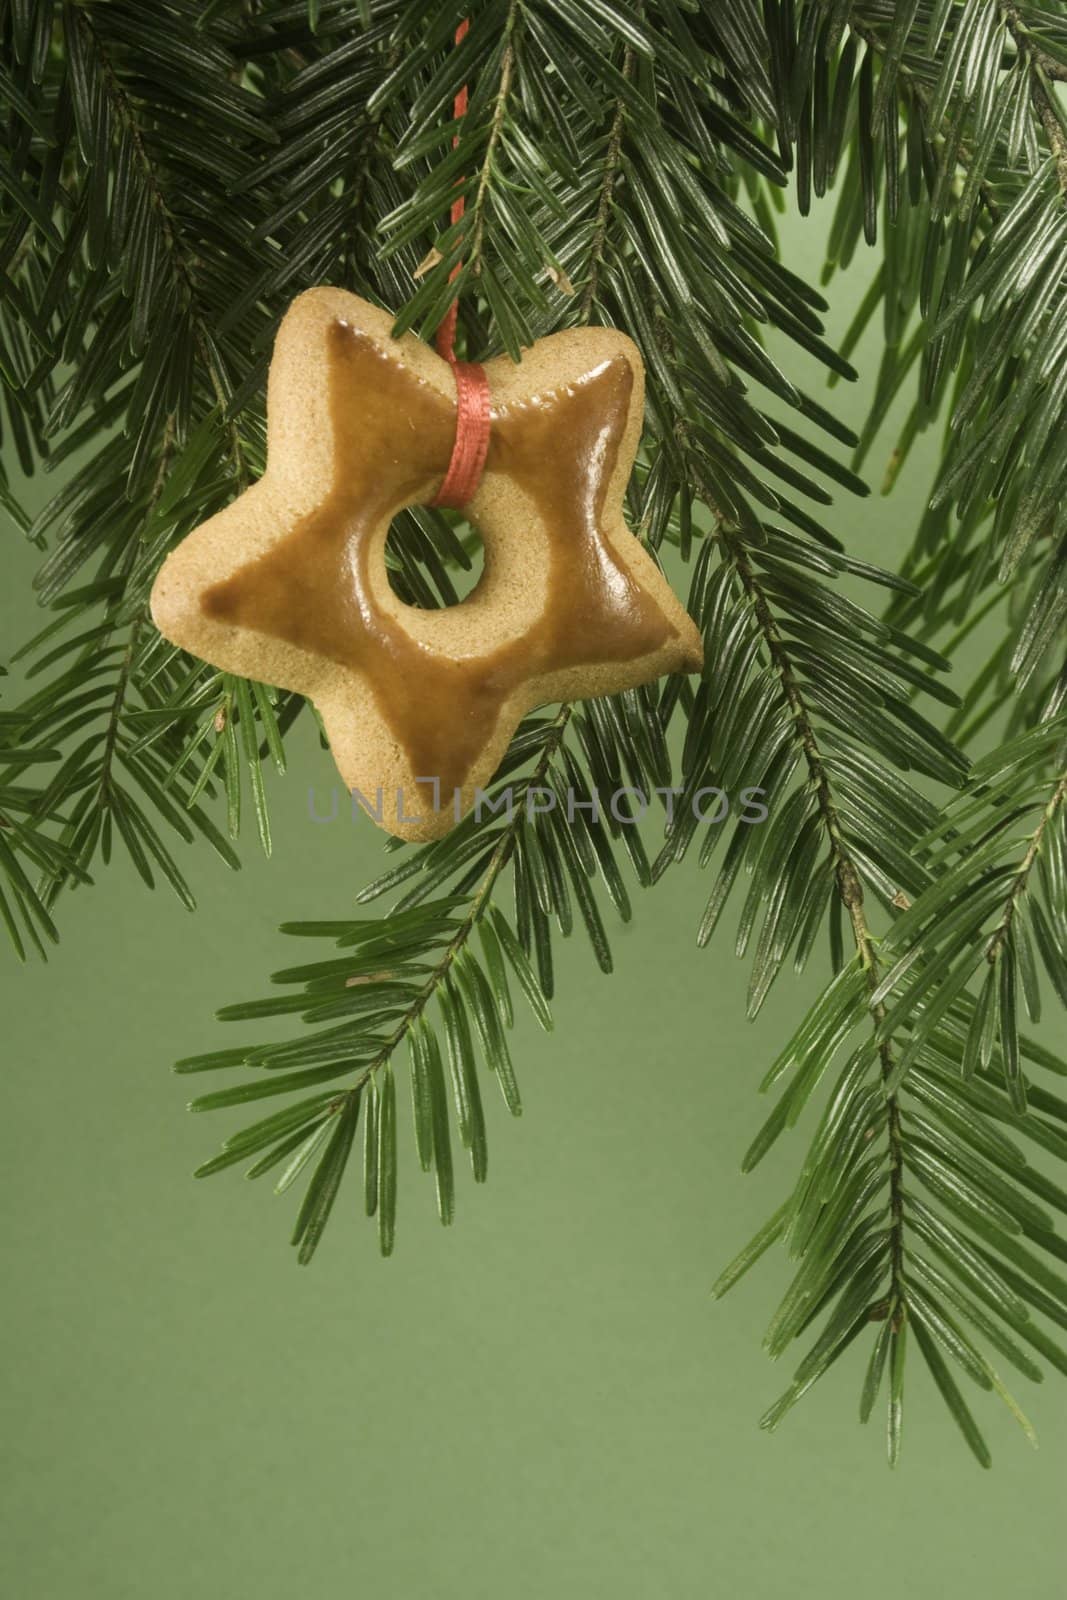 Star Christmas cookie hanging by ribbon under fir branch and isolated on green paper